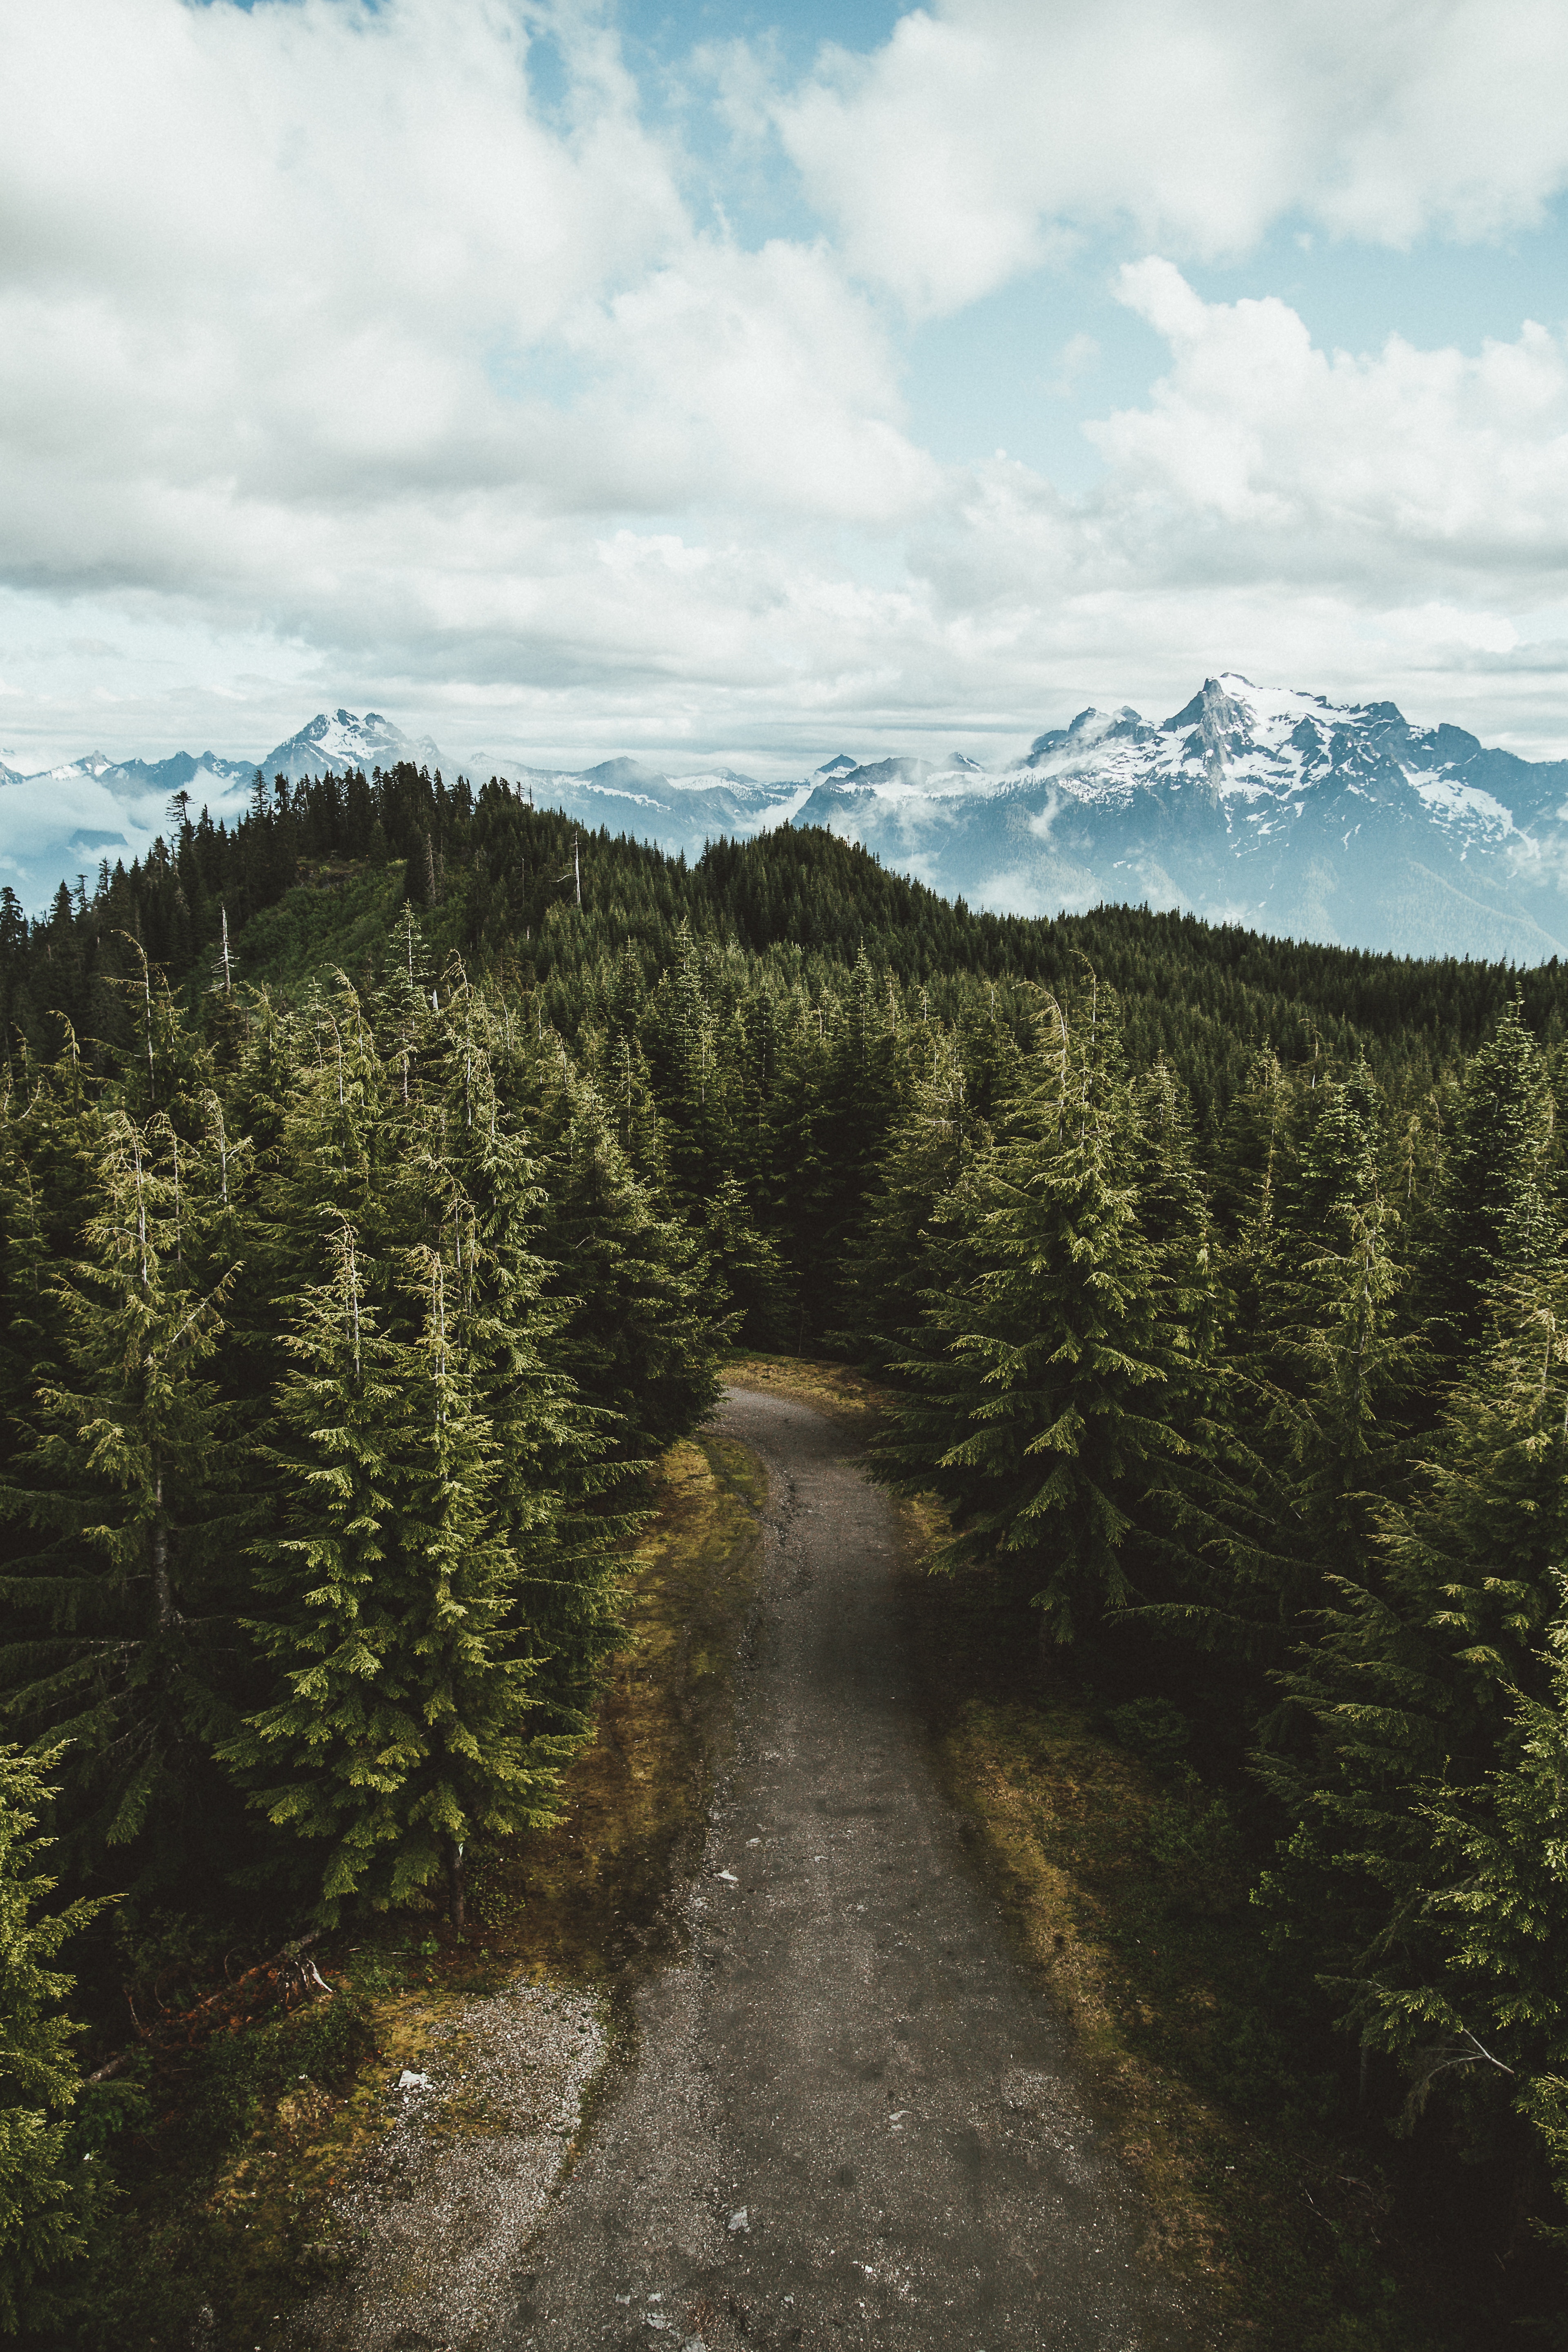 usa, united states, landscape, nature, trees, sky, mountains, view from above, road, darrington images